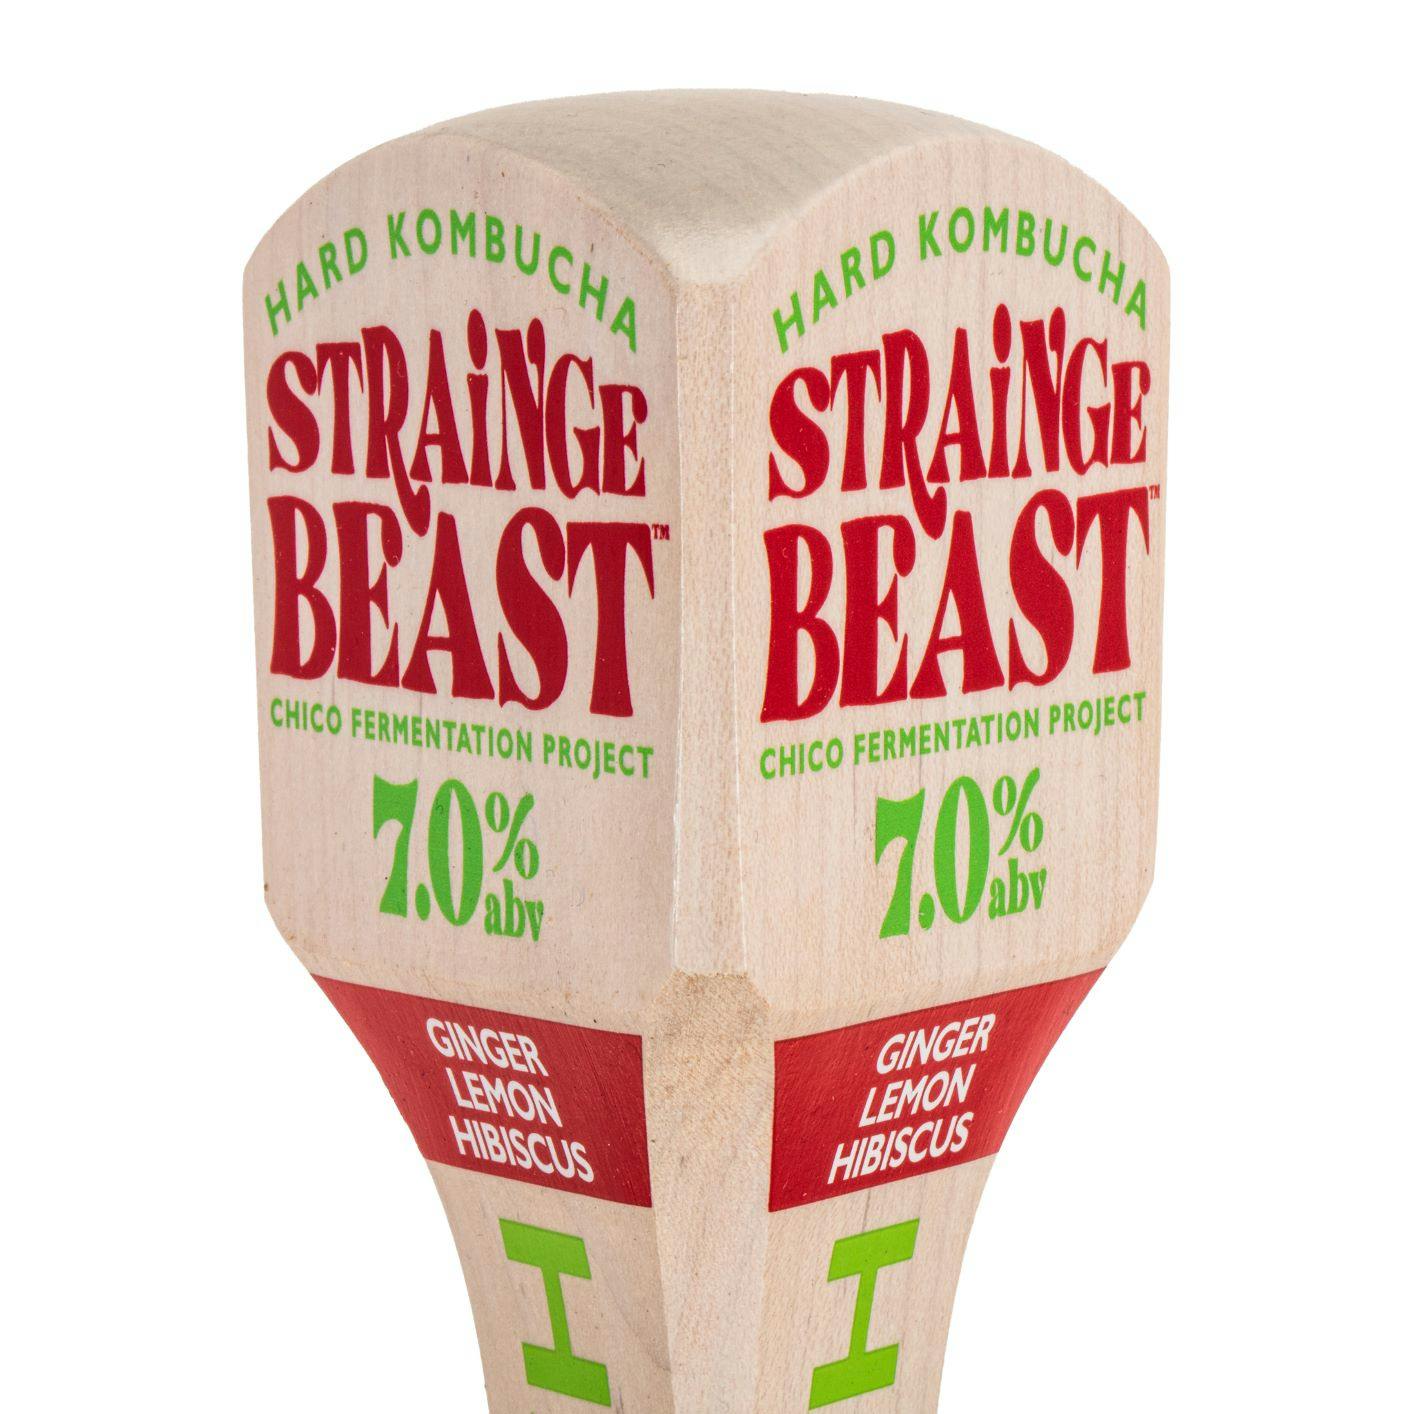 Sierra Nevada Brewing Co. Strainge Beast tap handle - close up view of top of the handle featuring Strainge Beast logo